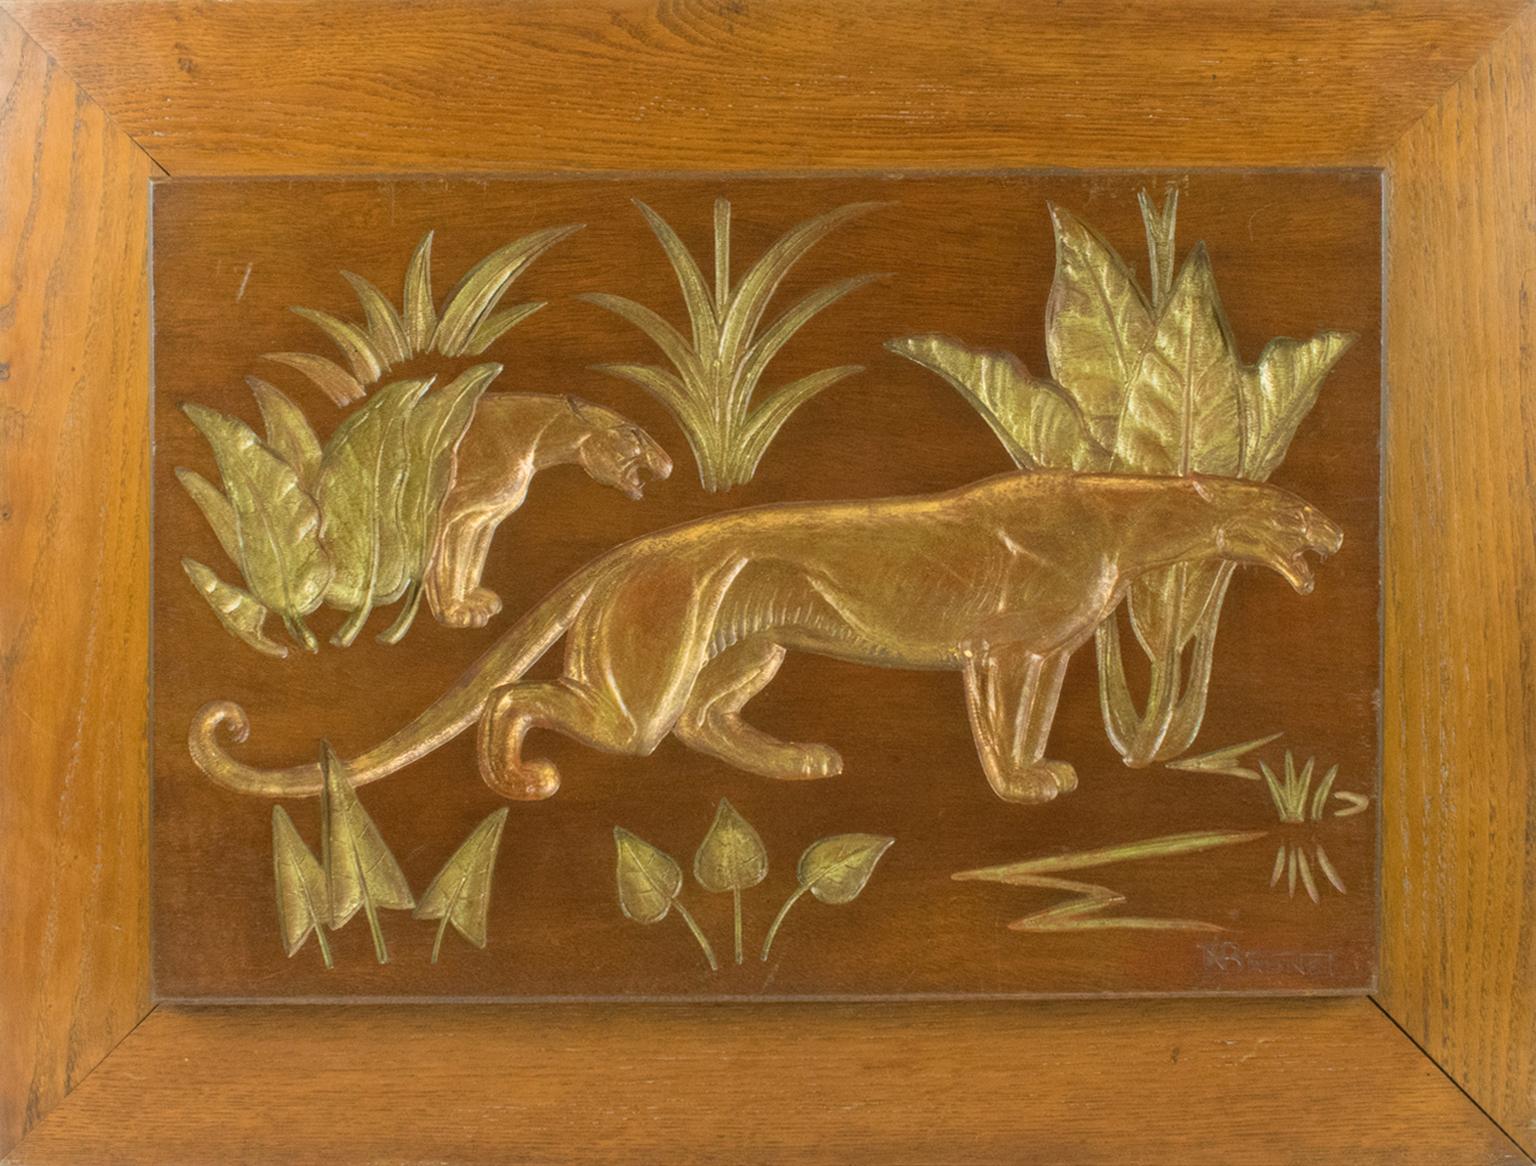 This sumptuous engraved wooden panel depicting panthers in the bush was created by N.R. Brunet (France, 20th Century). Art Deco design typical of the period, N.R. Brunet is known for his bronze sculptures representing felines. The engraving works